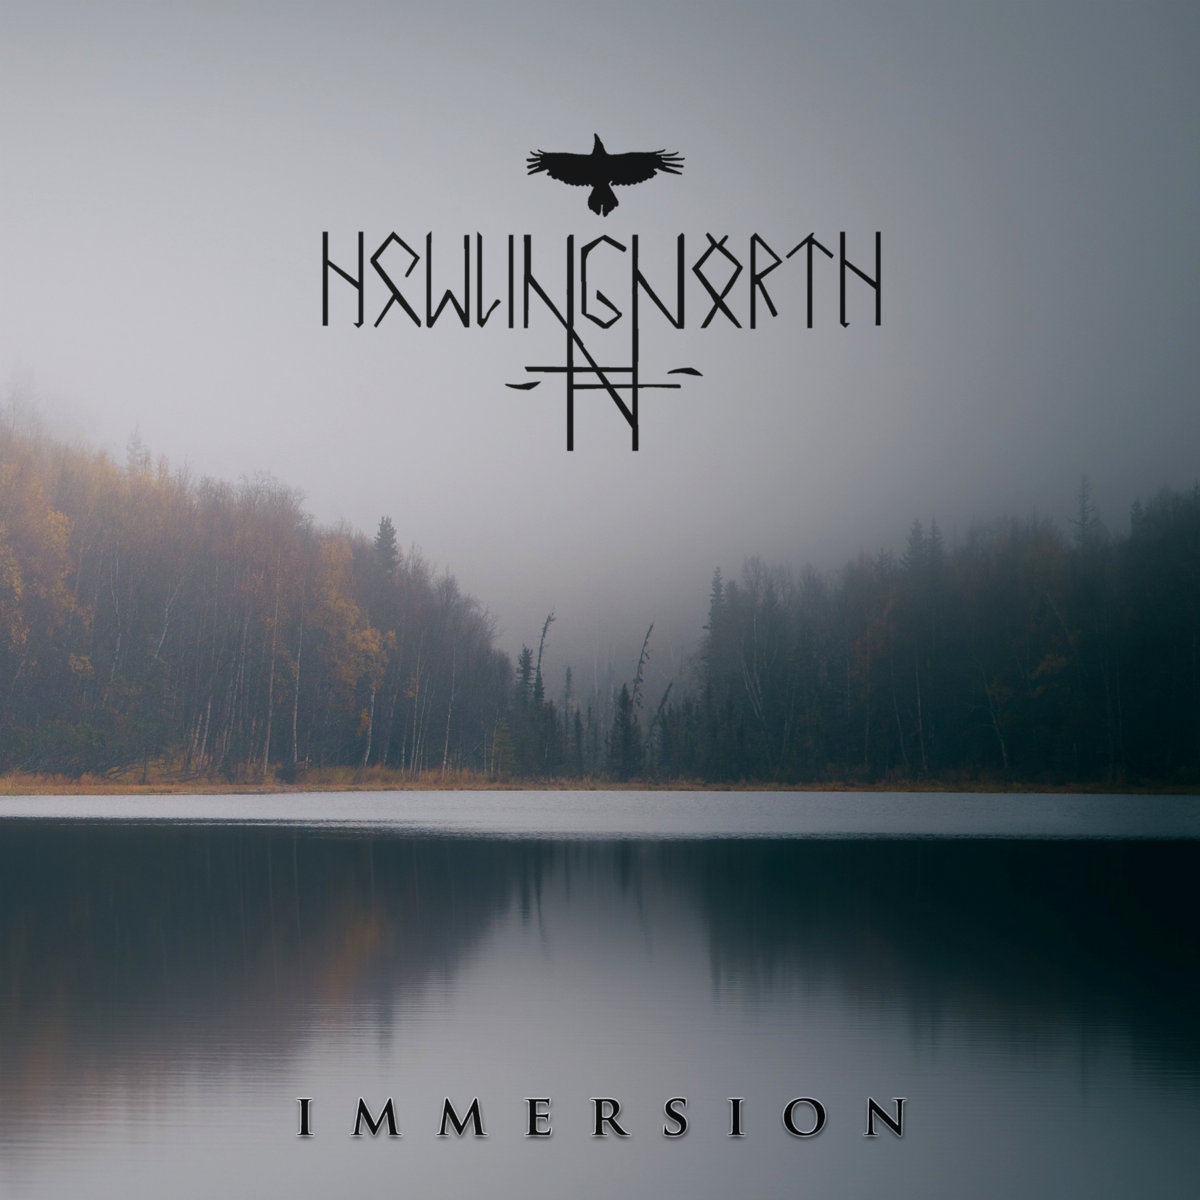 http://www.metalmusicarchives.com/images/covers/howling-north-immersion-20171112121329.jpg